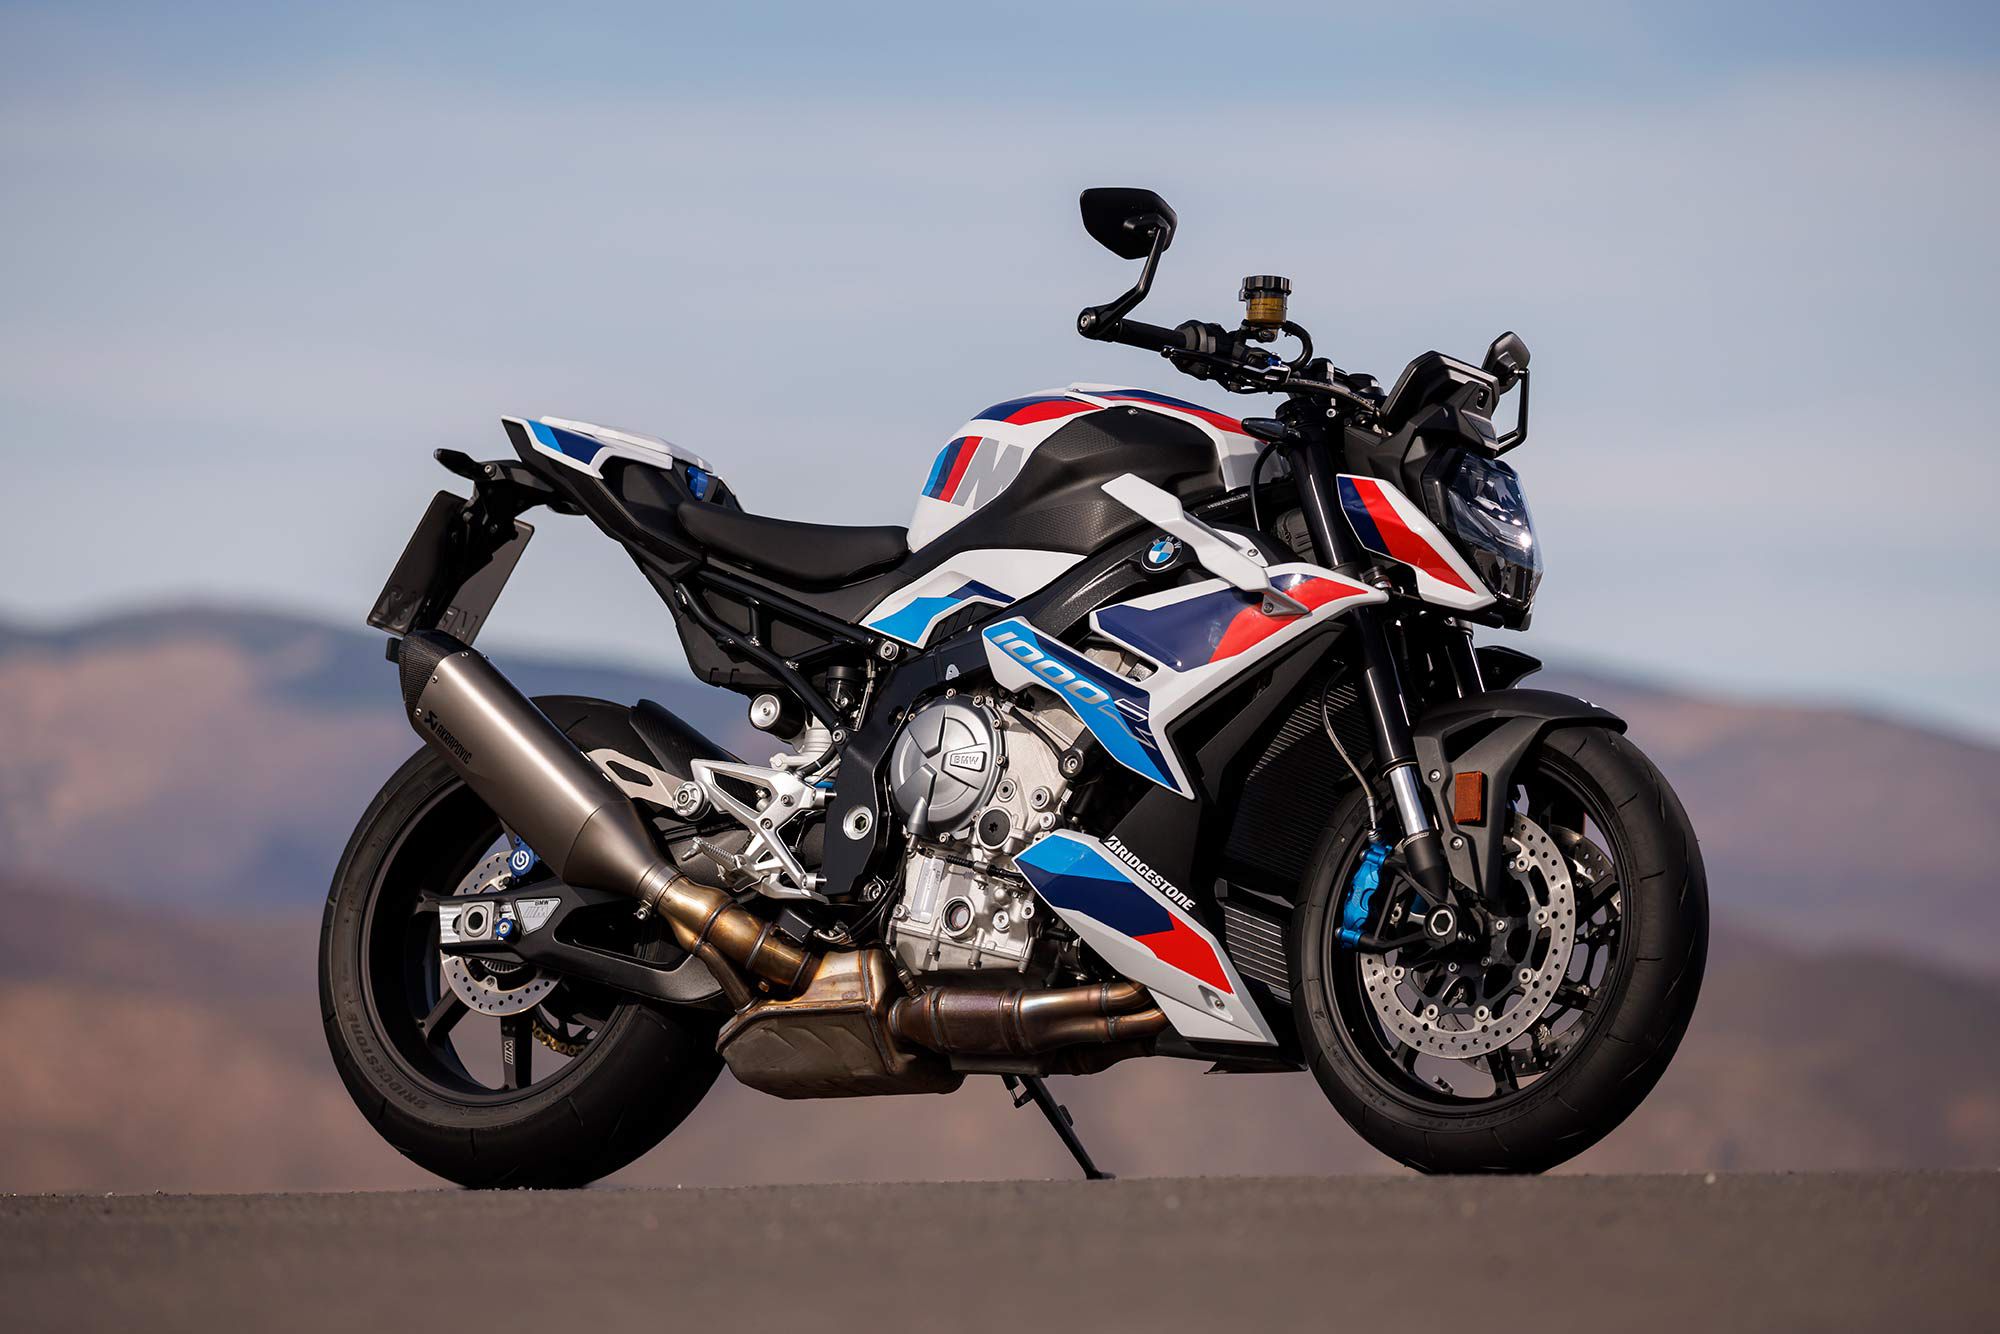 The base S 1000 R is $13,945, compared to the M 1000 R at $21,345.